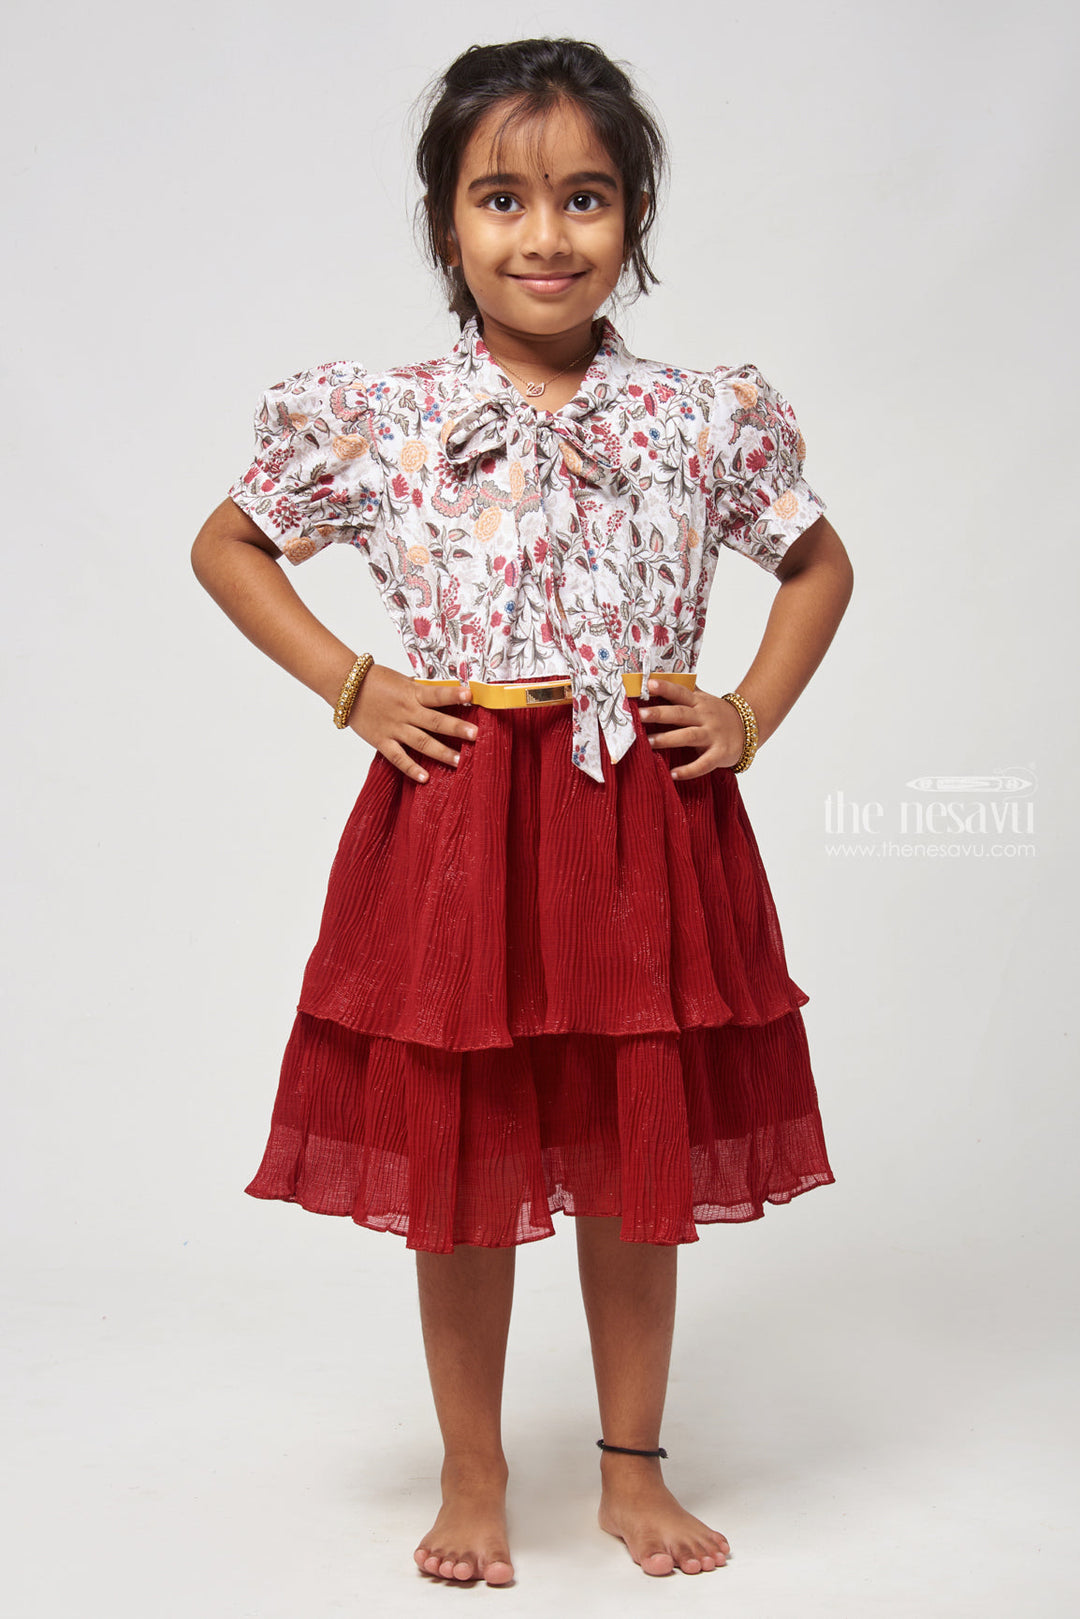 The Nesavu Frocks & Dresses Red Double Layer Flared Frock - Floral Tie Neck & Chic Look Nesavu 20 (3Y) / Red GFC1104B-20 Floral Printed Tie neck Frock | Girls Cotton Frock | The Nesavu